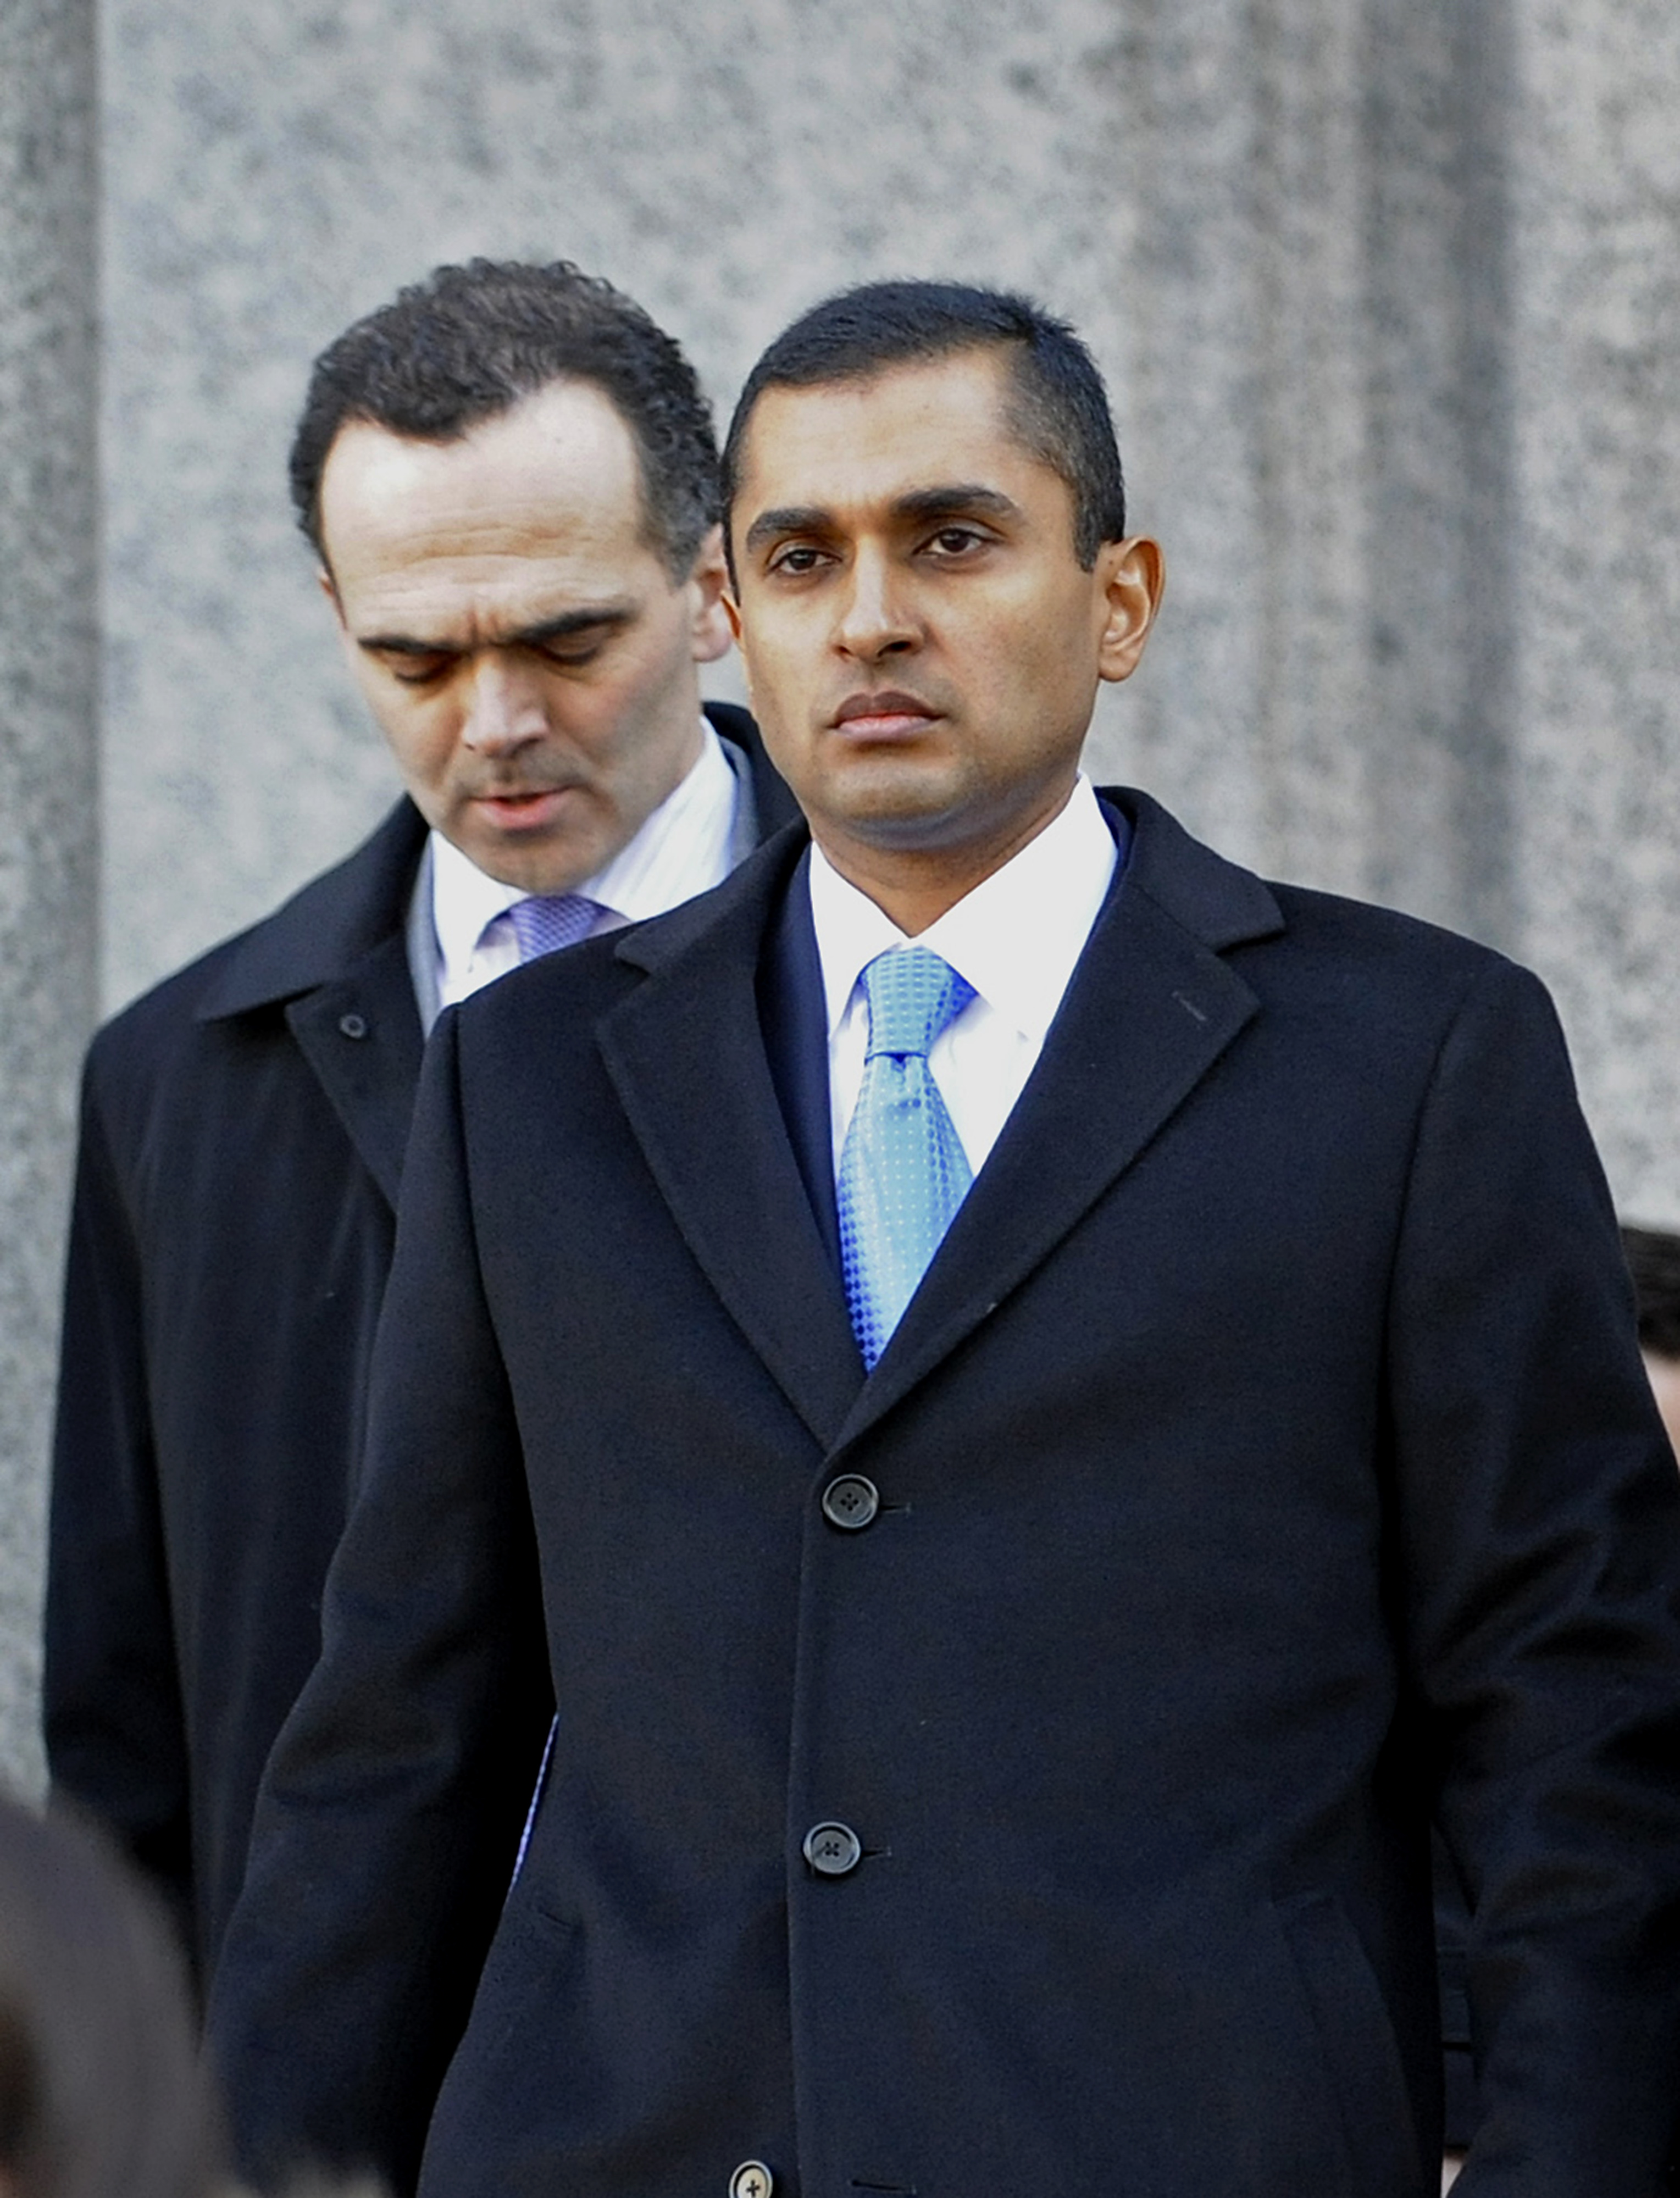 Mathew Martoma, center, a former portfolio manager with SAC Capital Advisors LP, exits federal court in New York, U.S. following the jury's verdict, on Thursday, Feb. 6, 2014. (Louis Lanzano / Bloomberg via Getty Images)